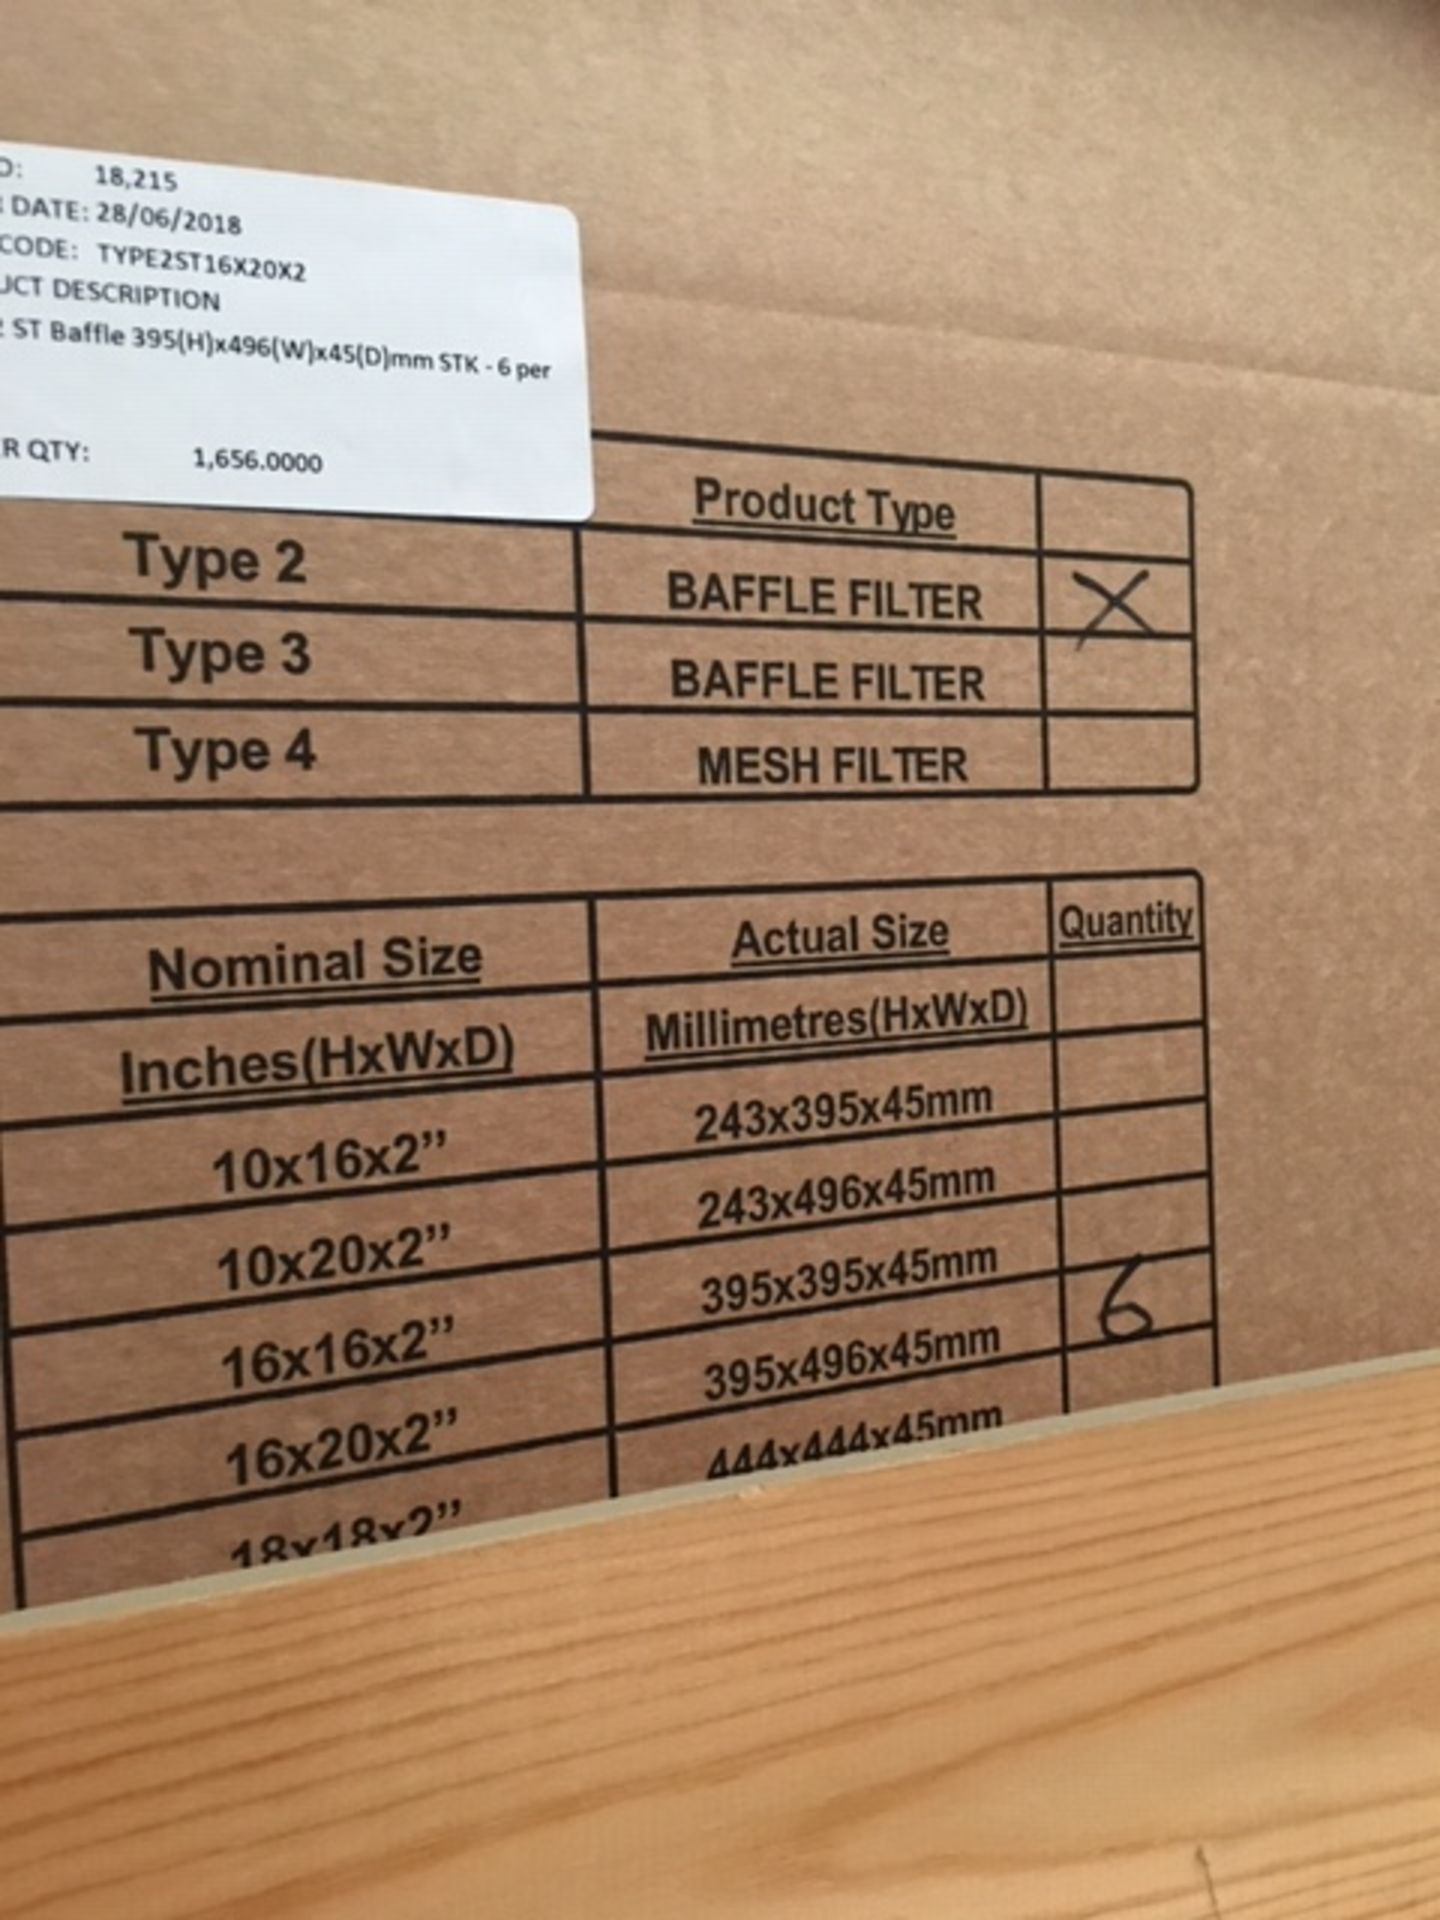 25 x Boxes of Type 2 Baffele Filters - 395mm x 496mm x 45mm - 6 per box - Image 3 of 3